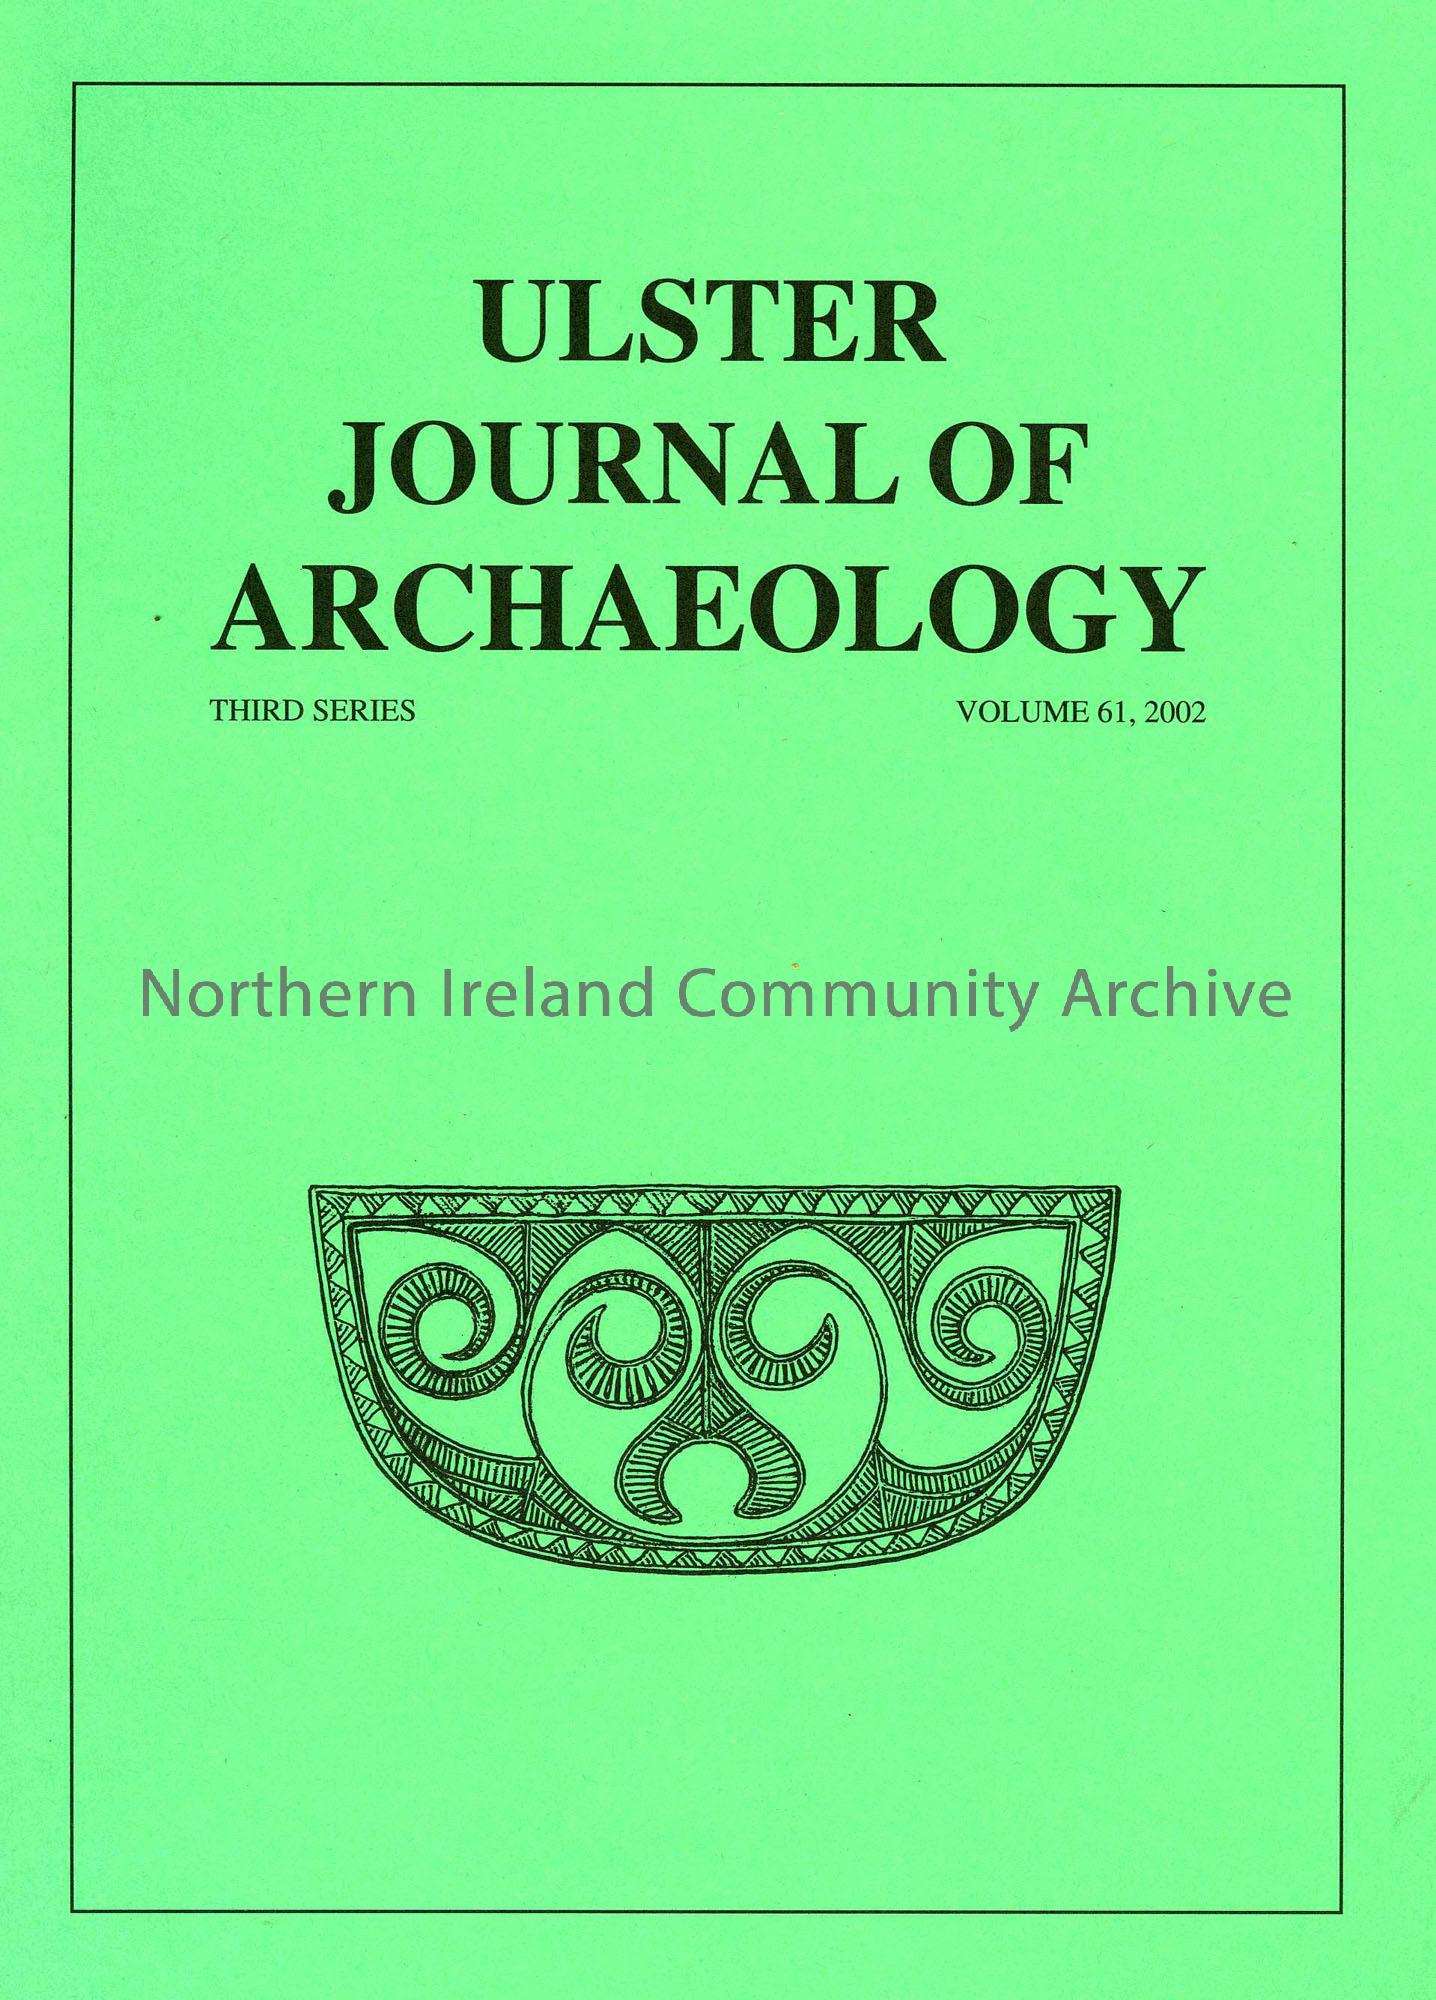 book titled, Ulster Journal of Archaeology. Third Series Volume 61, 2002 (3376)